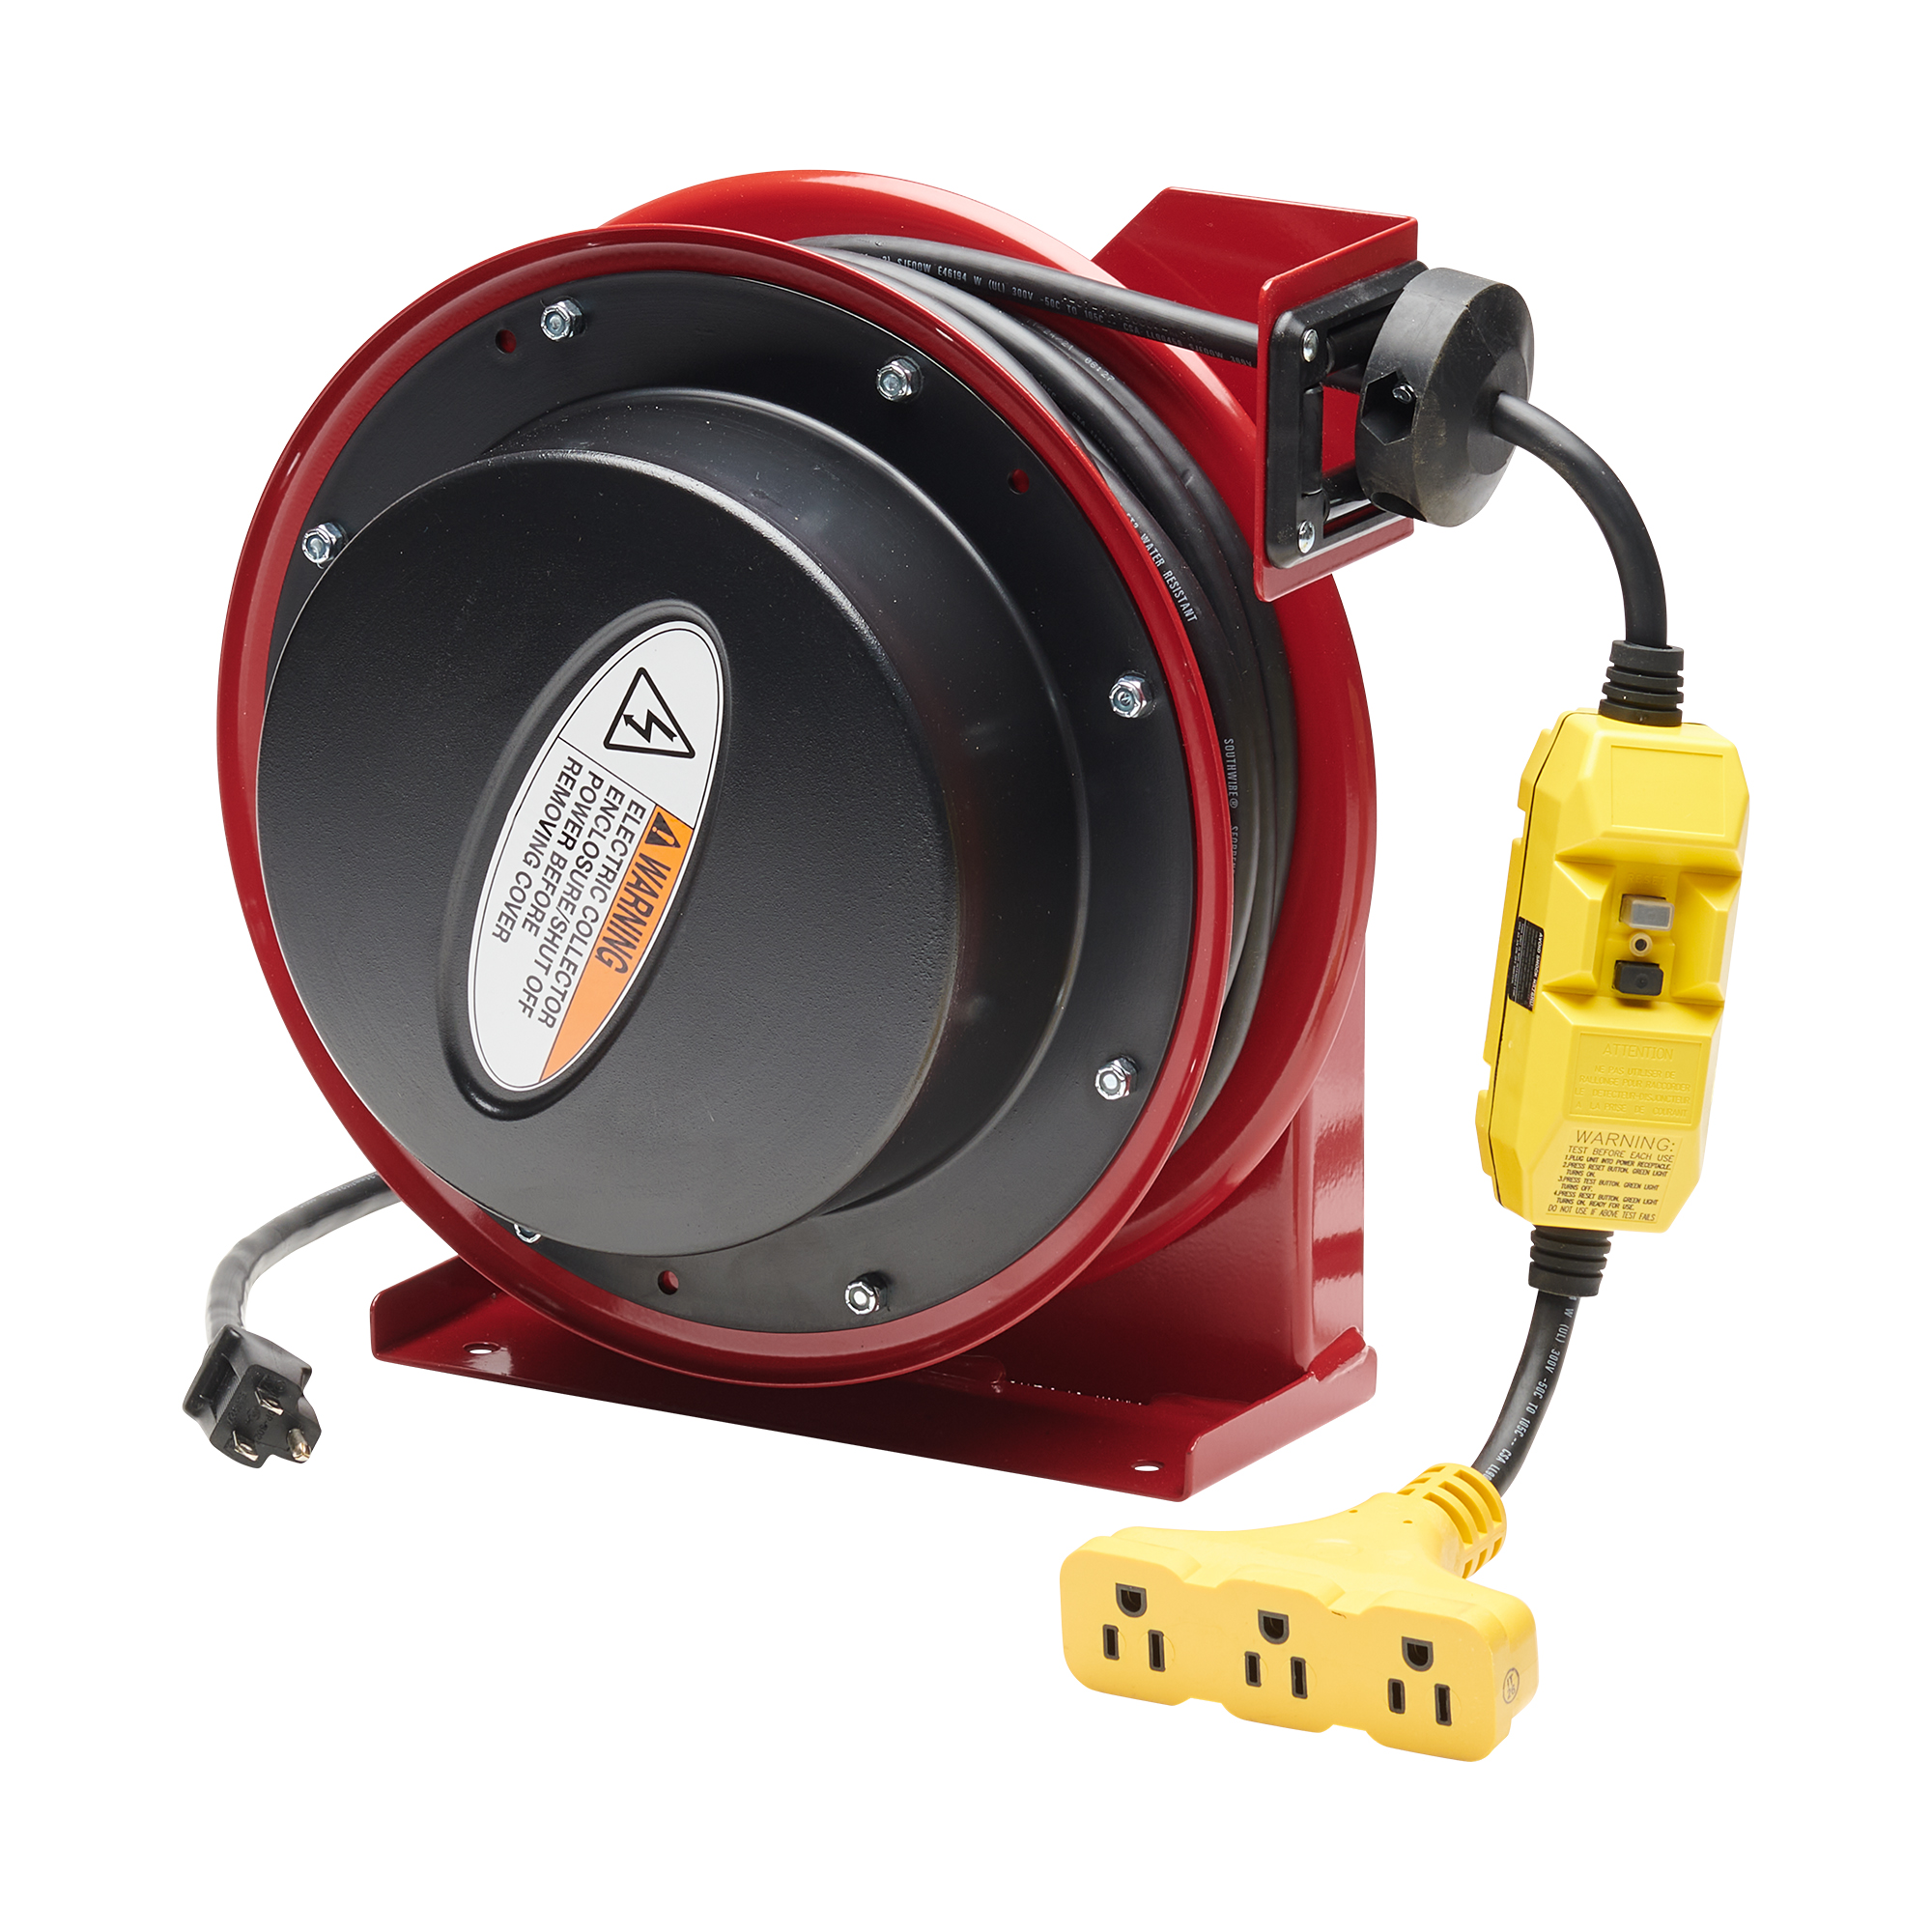 Reelcraft L 4545 123 9G - 12/3 45 ft. Premium Duty Triple Outlet w/ GFCI Power  Cord Reel